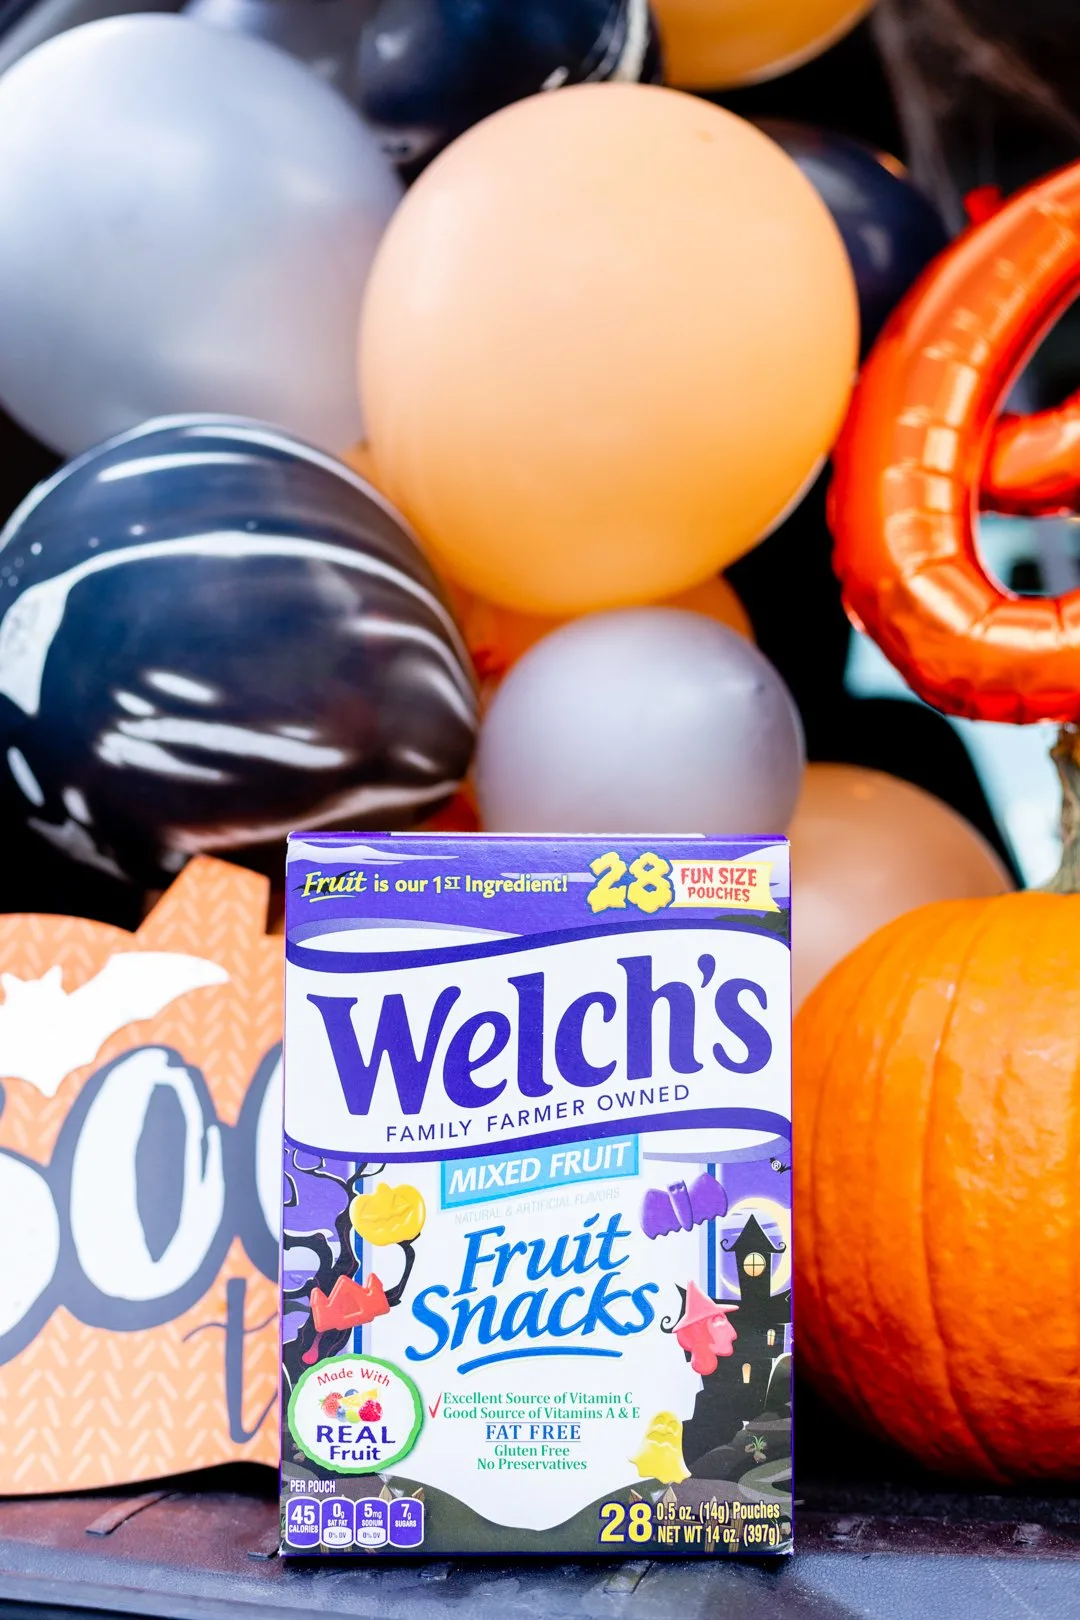 Trunk or Treat ideas with Halloween Welch's Fruit SnacksTrunk or Treat ideas with Halloween Welch's Fruit Snacks